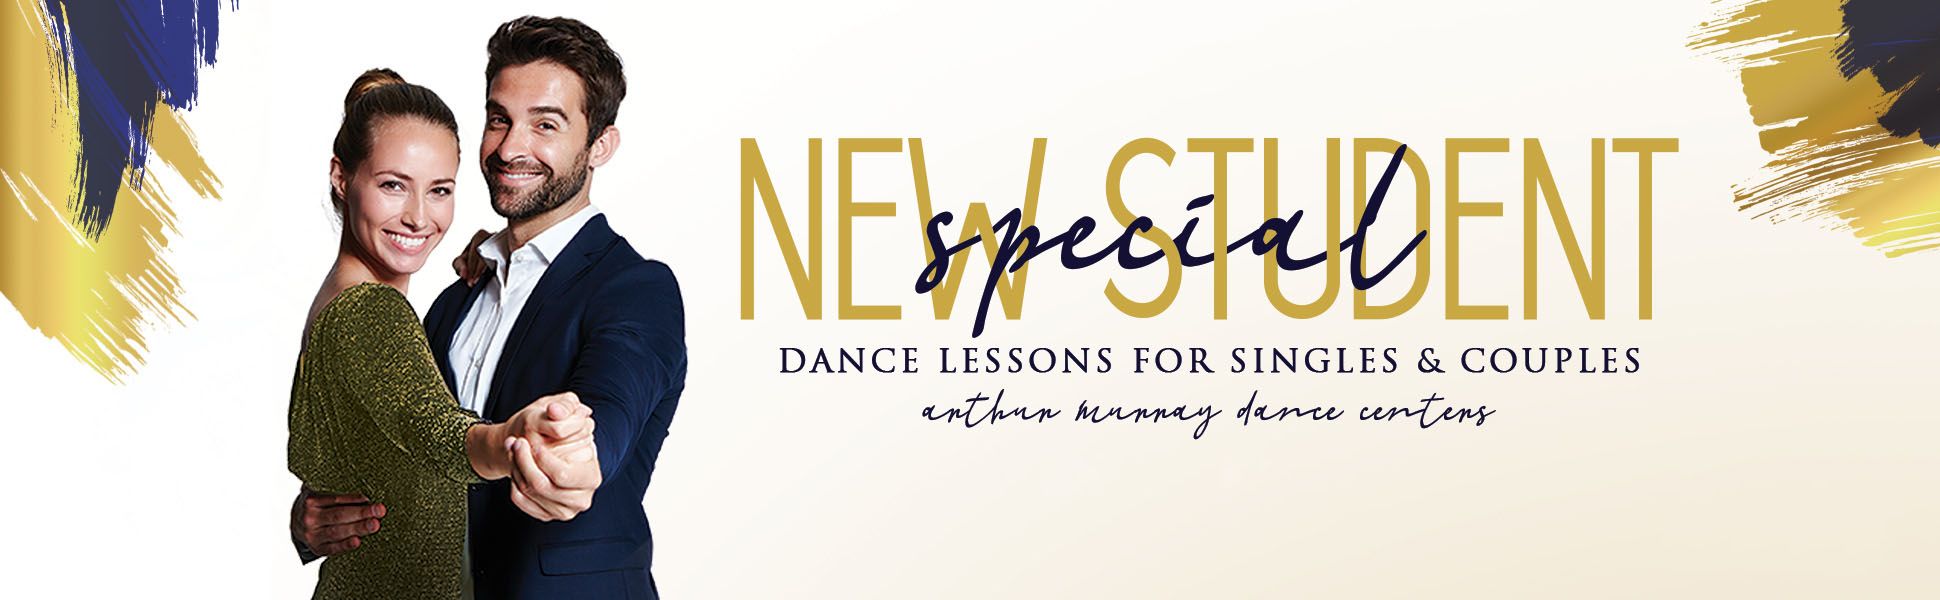 New Student Offer Banner Dance Lessons For Singles & Couples